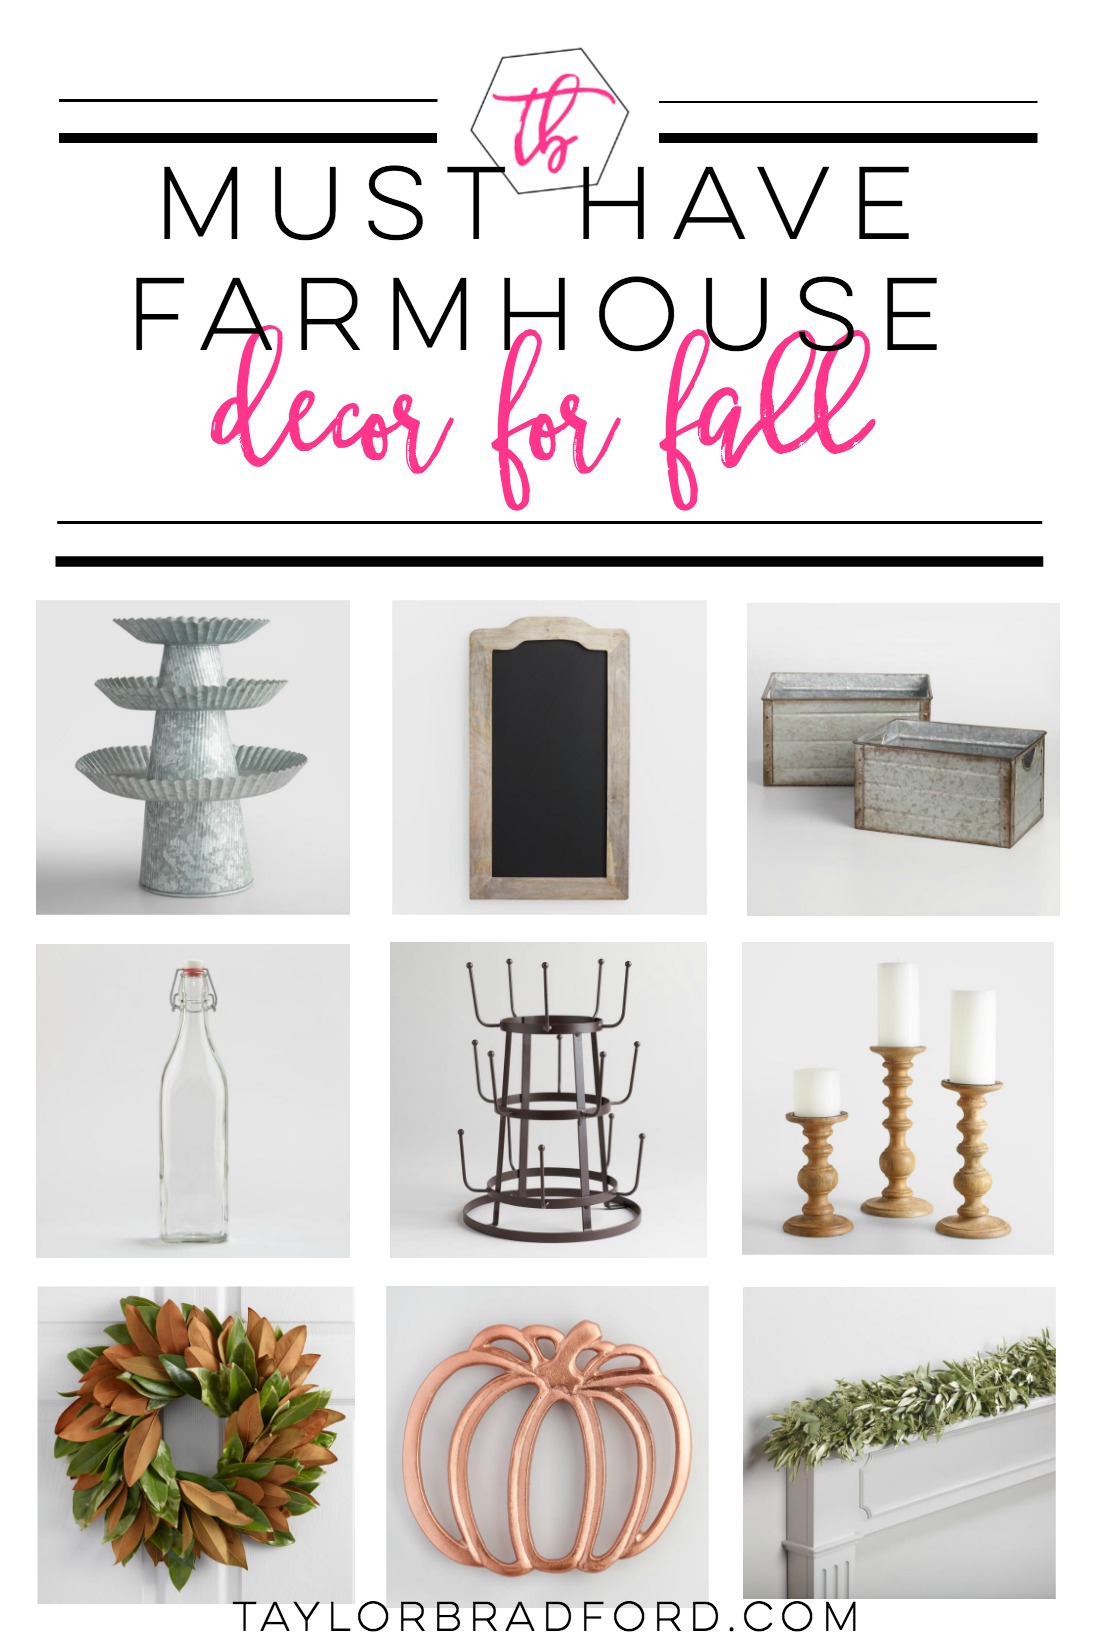 Love Farmhouse Decor?? Looking to update your home for fall? Check out these must haves for farmhouse decor for fall!